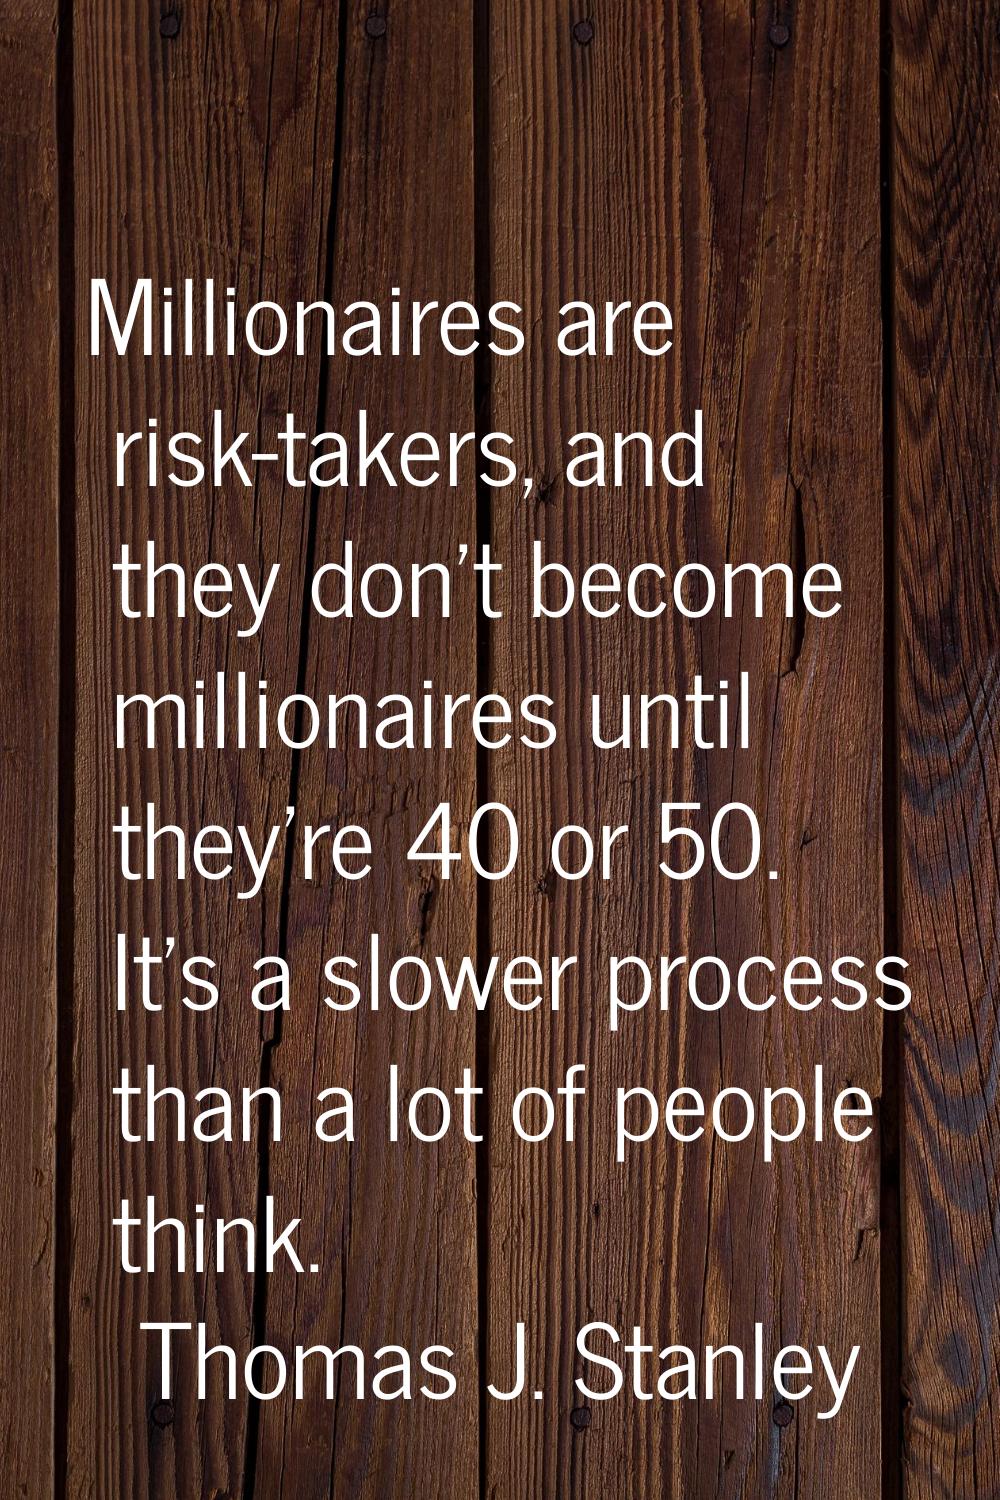 Millionaires are risk-takers, and they don't become millionaires until they're 40 or 50. It's a slo